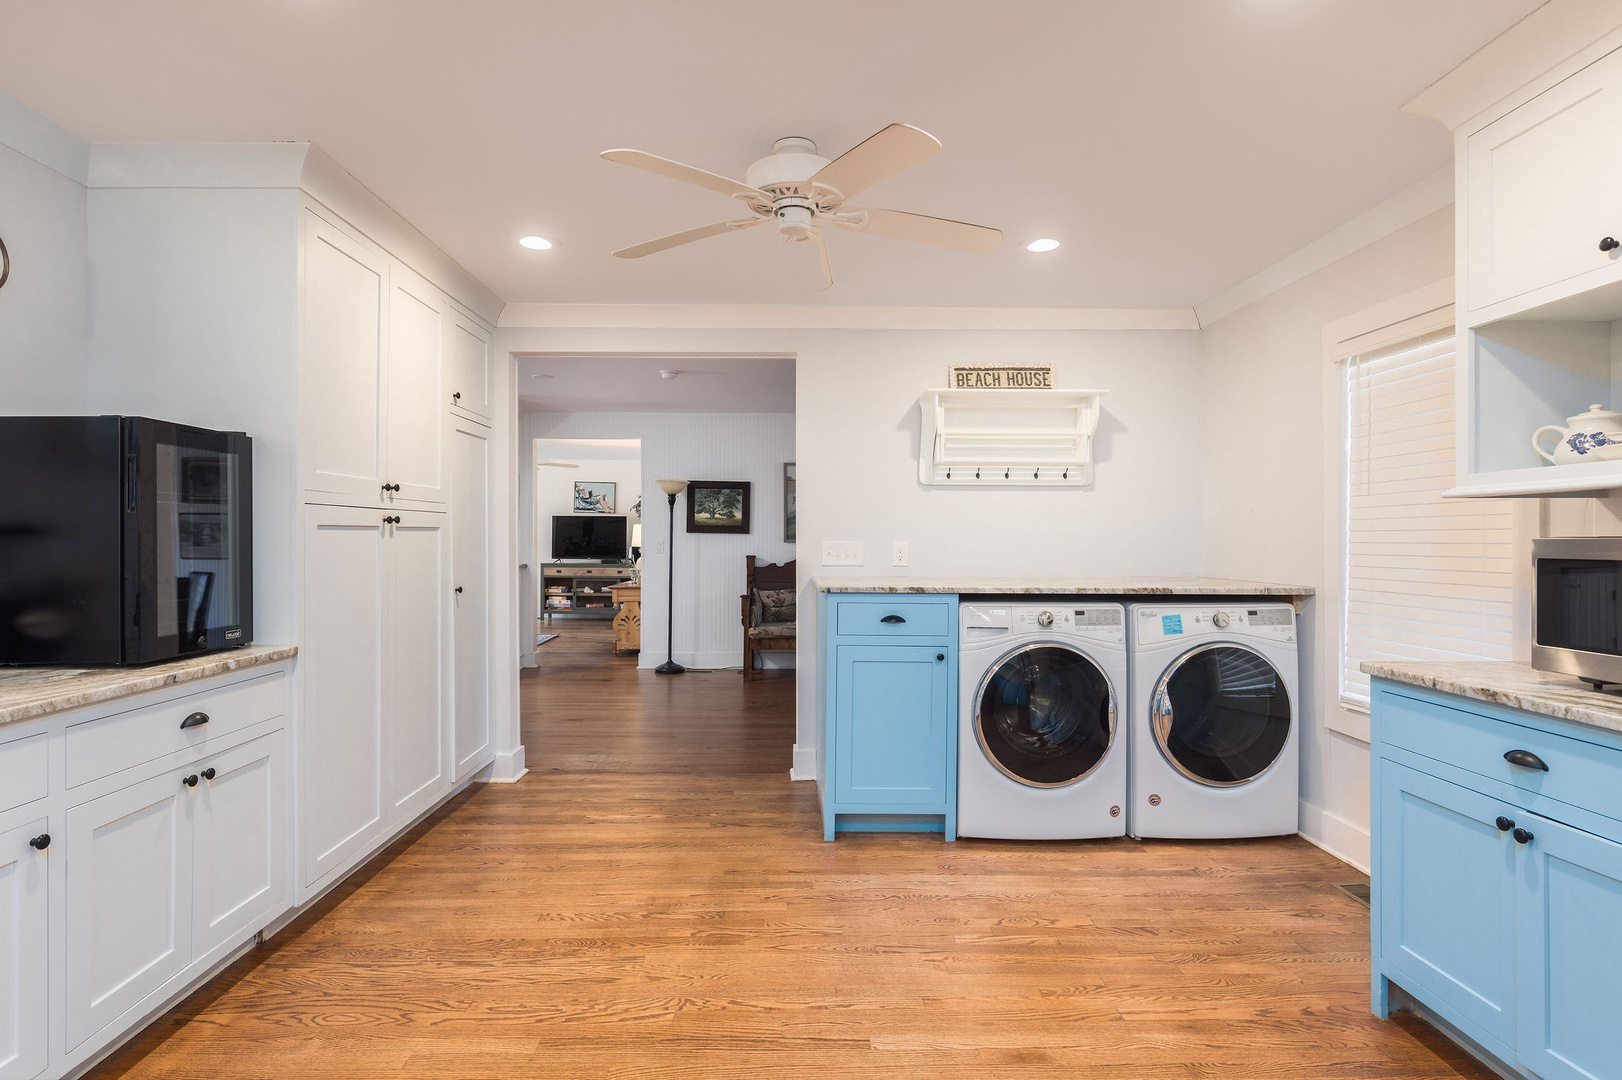 Kitchen and laundry area